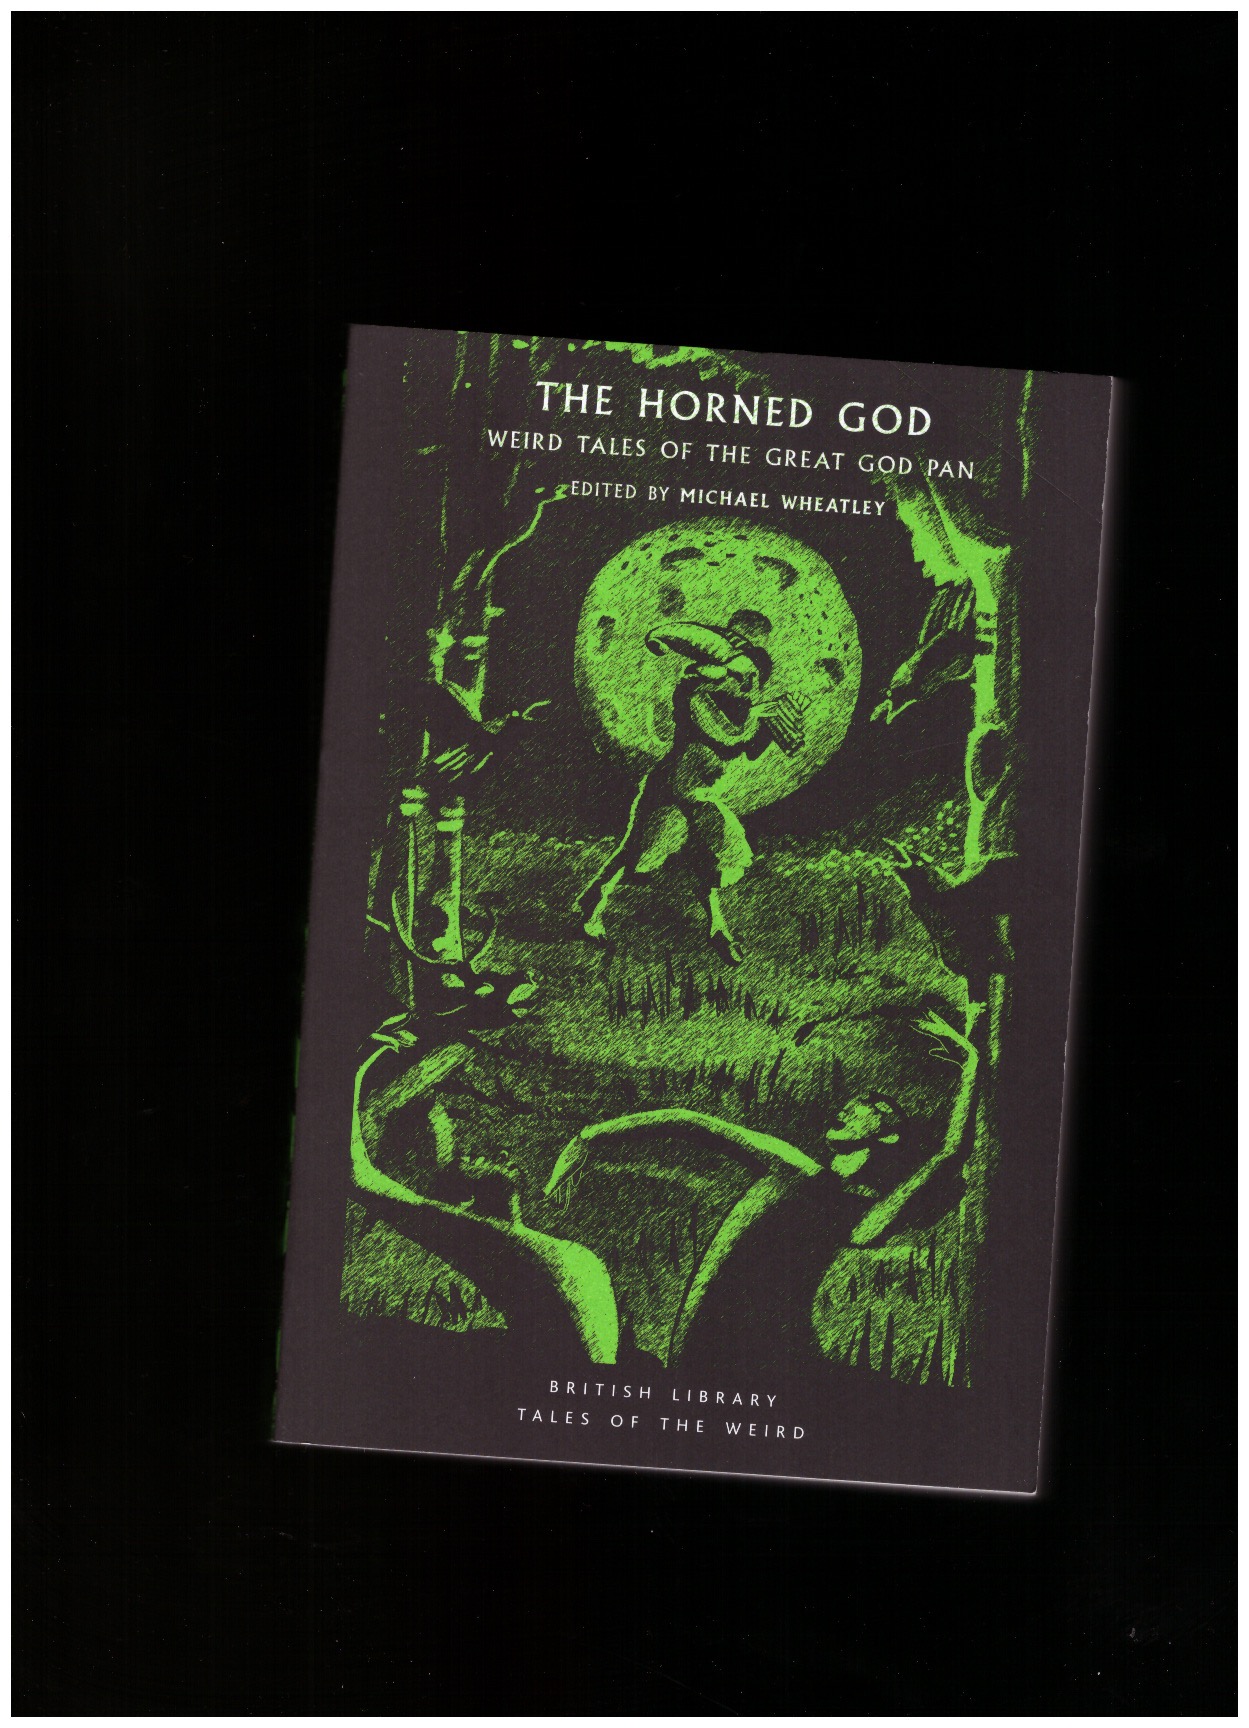 WEATHLEY, Michael (ed.) - The Horned God - Weird Tales of the Great God Pan